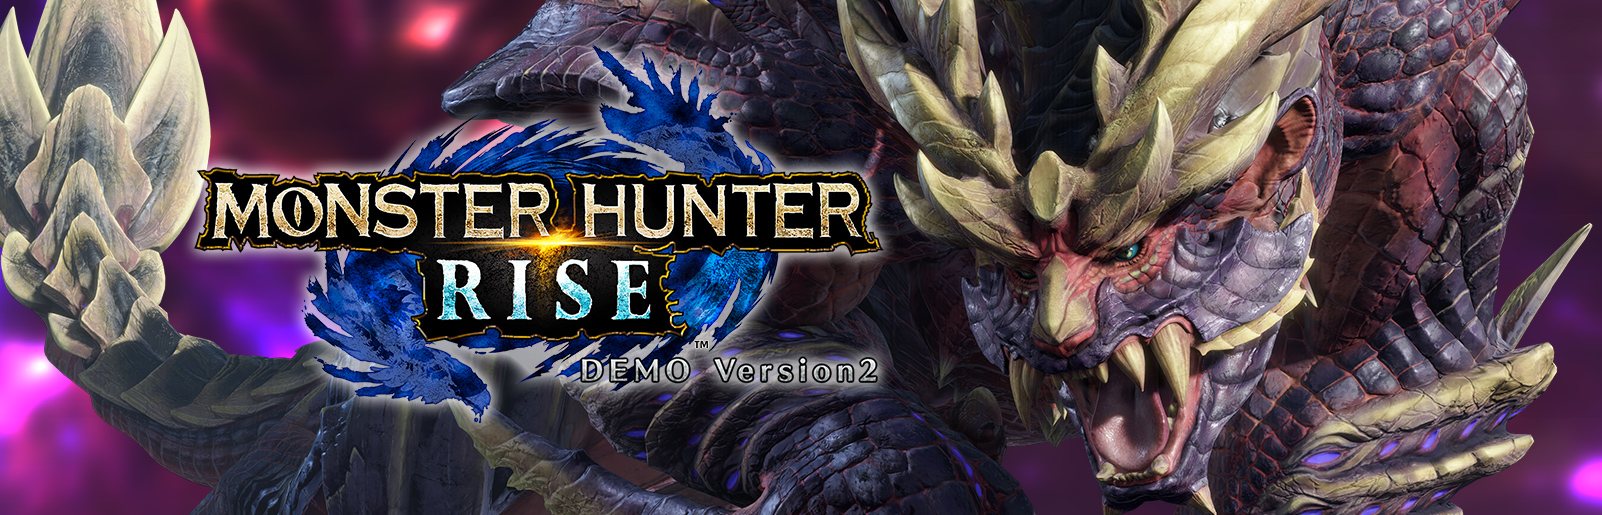 cannot download monster hunter rise demo